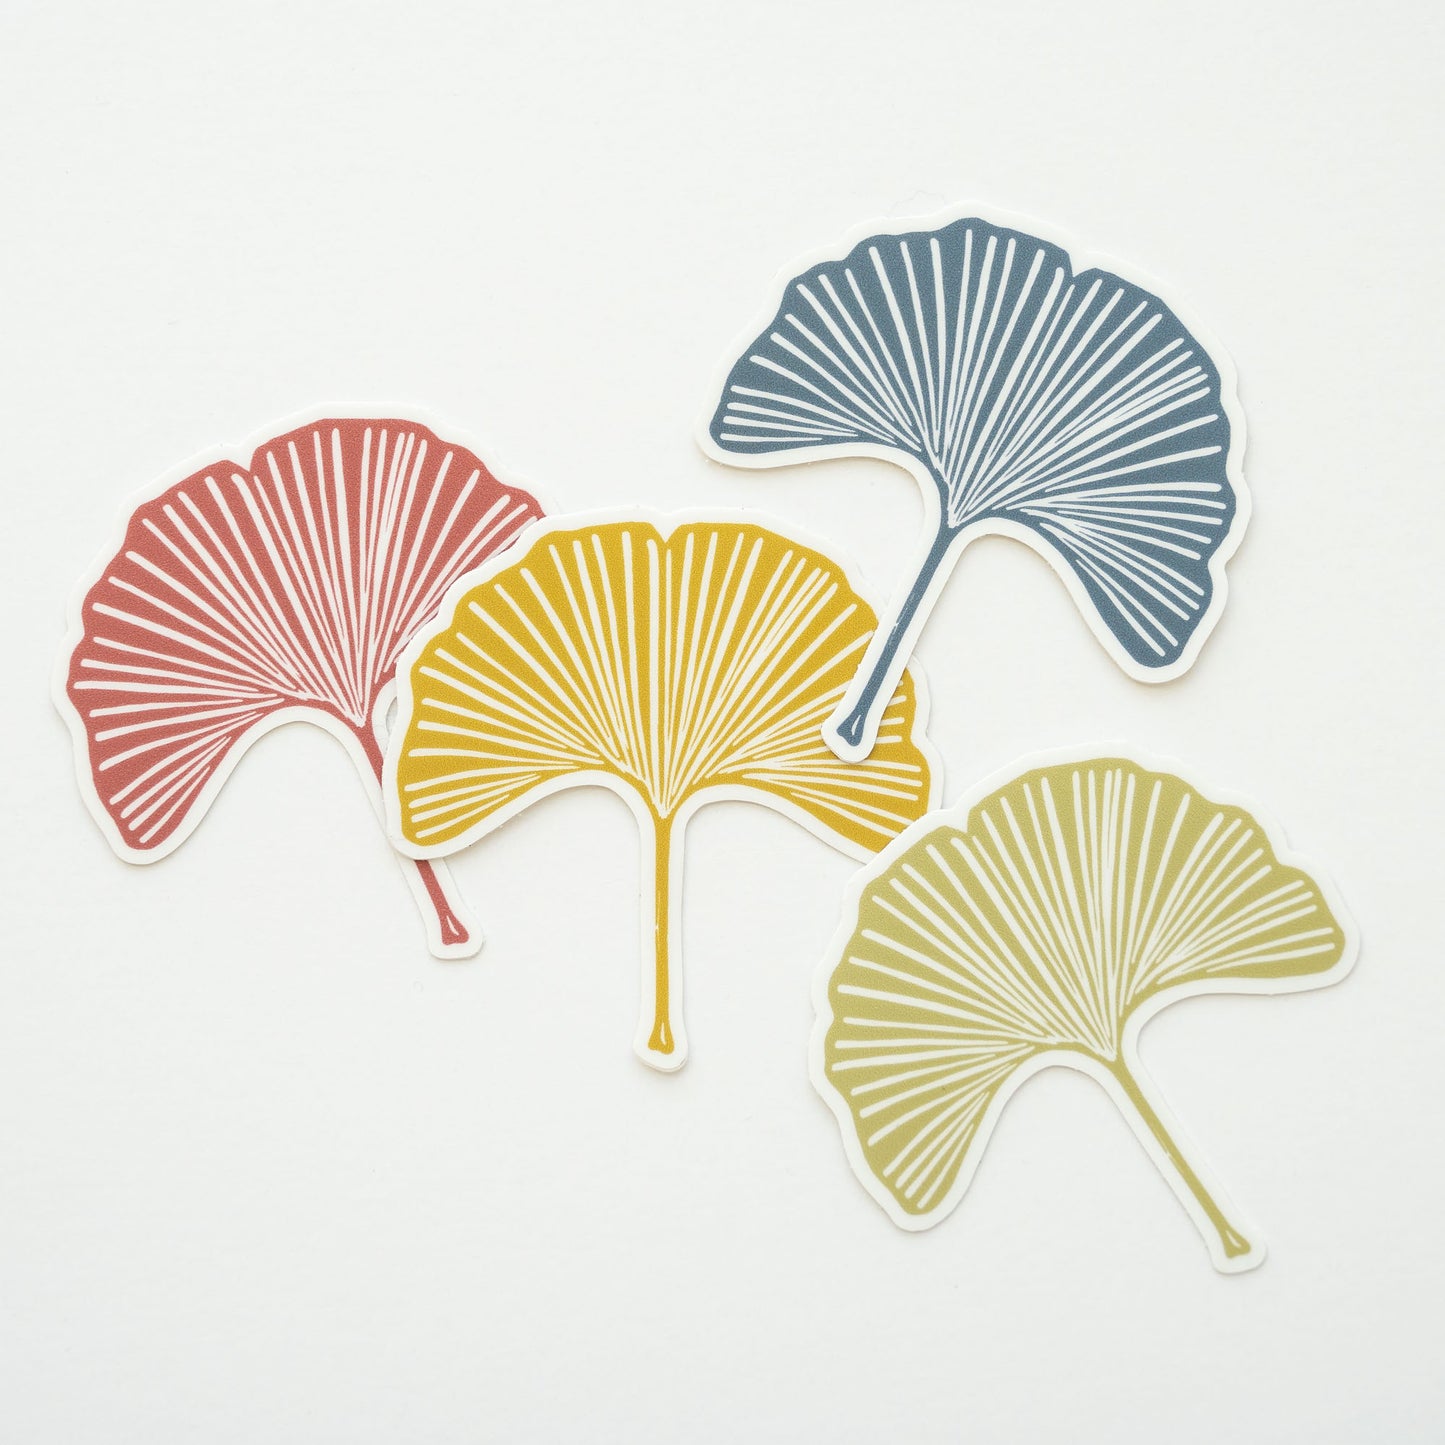 Four vinyl gingko leaf stickers in gold, blue, pink, and green